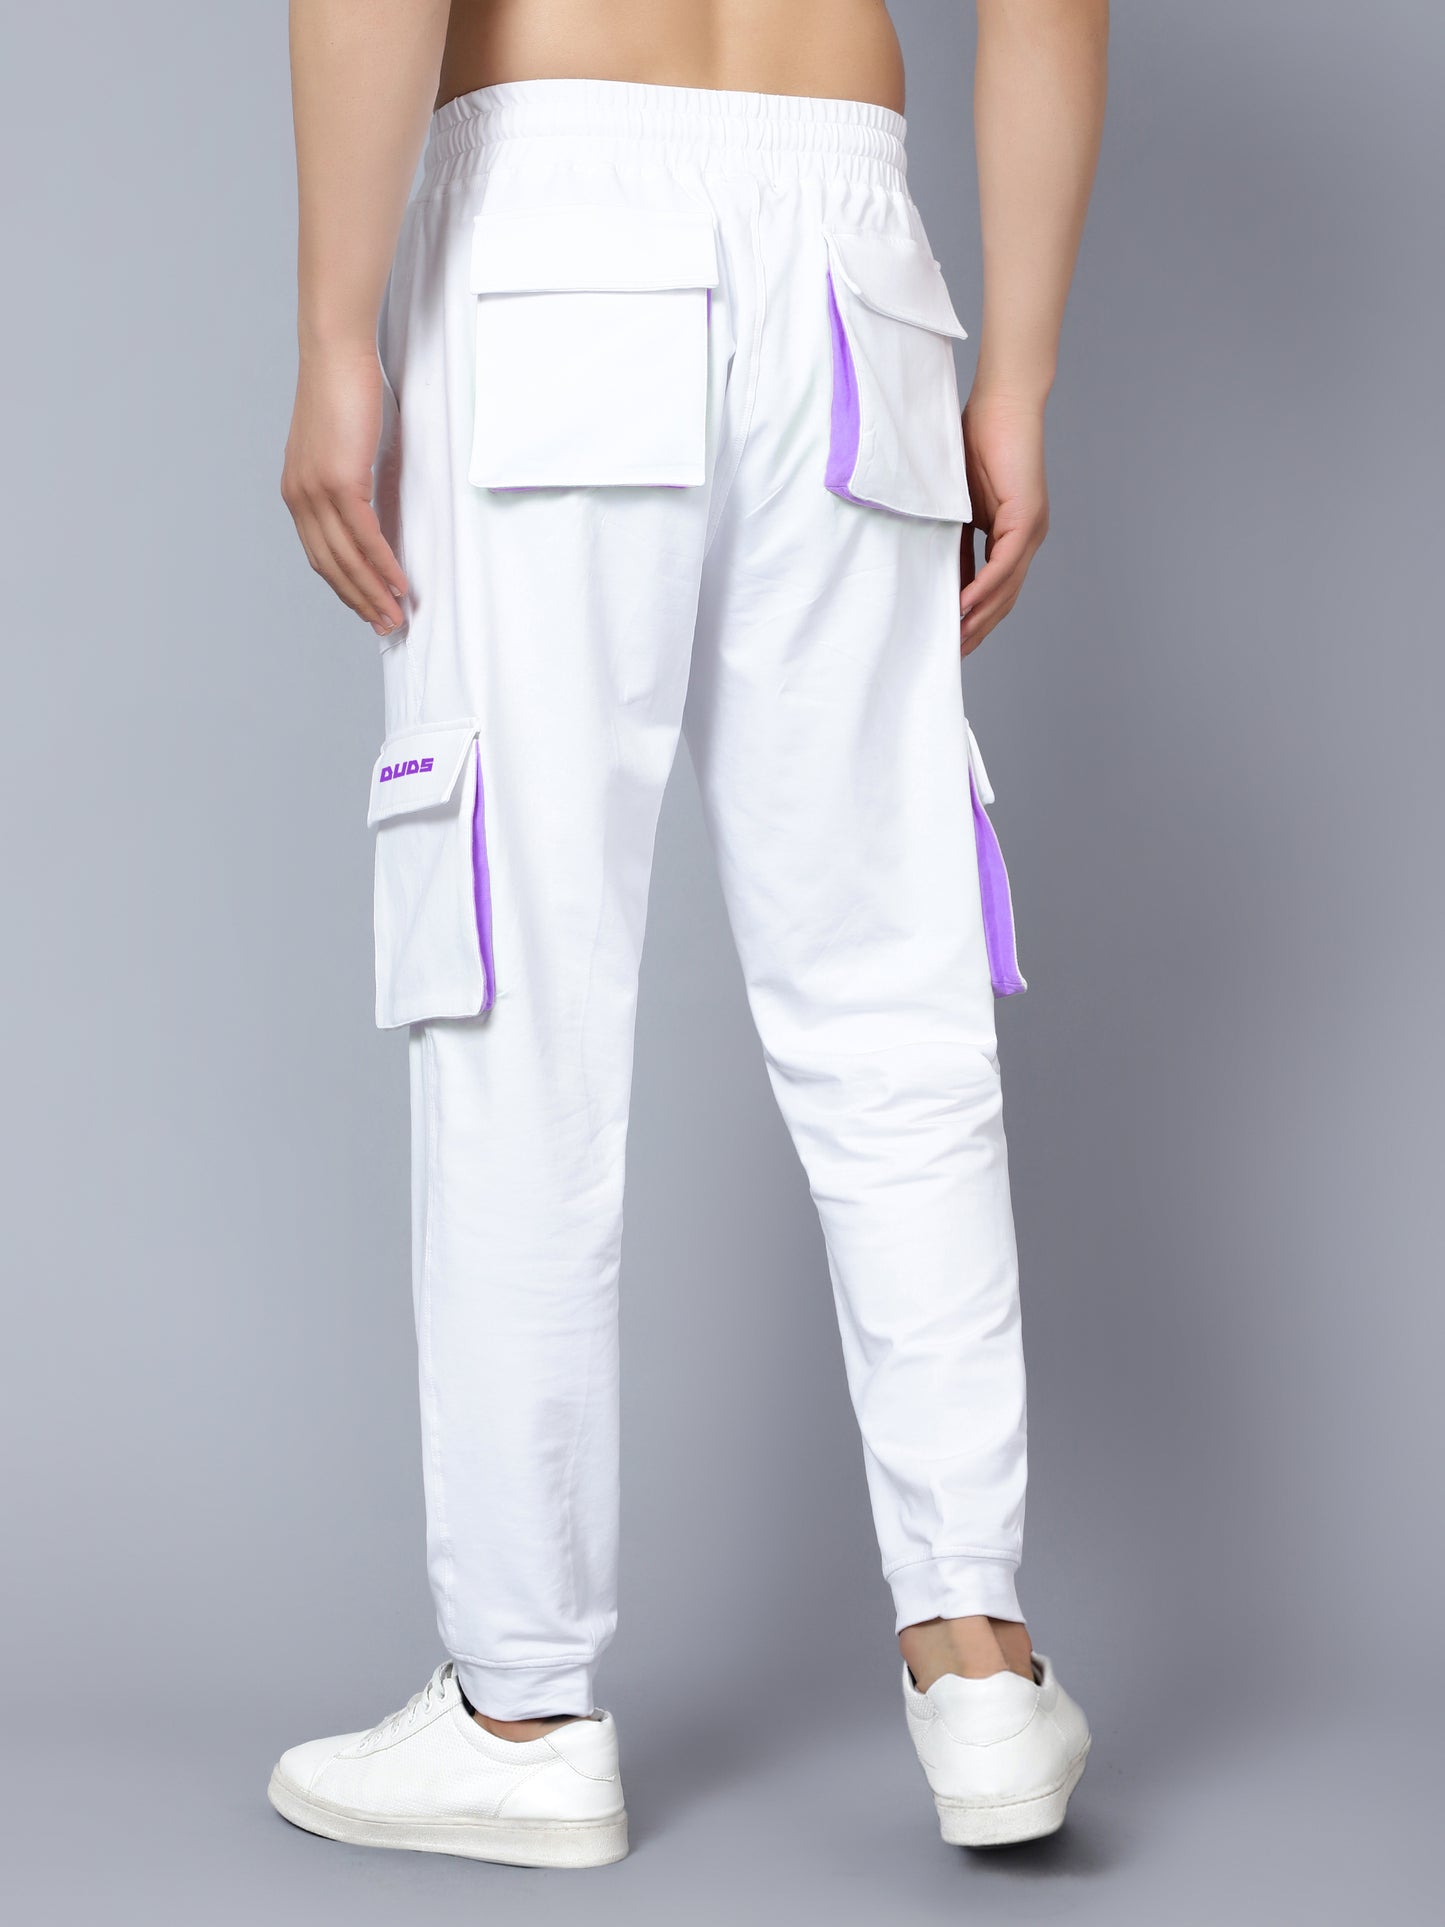 Cargo Pants (White With Lilac Highlighter) - Wearduds